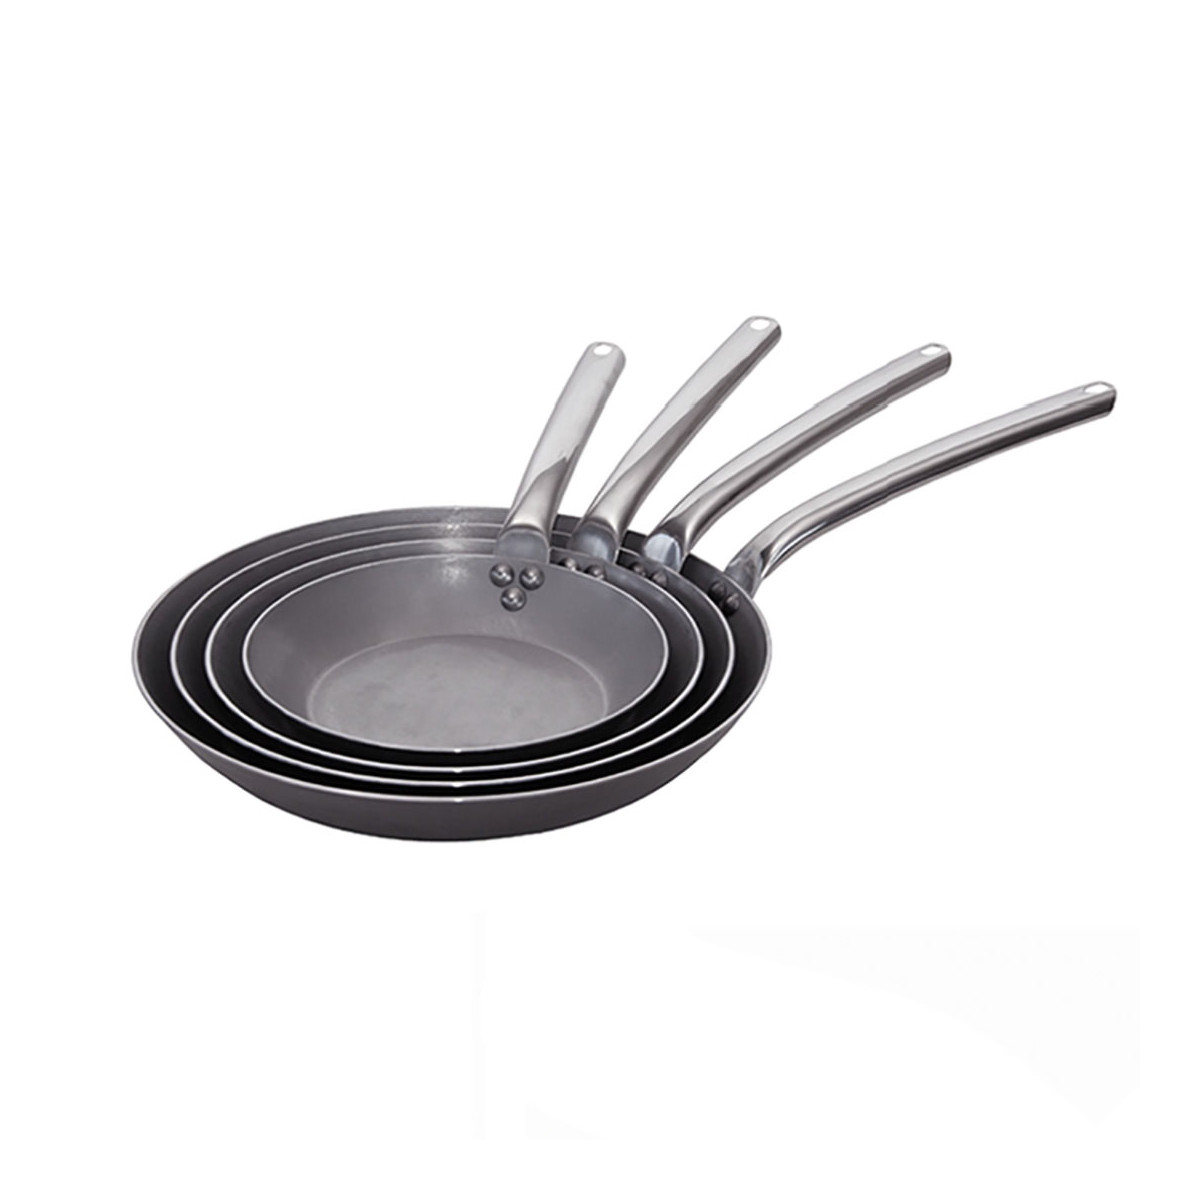 De Buyer 5130.20 Carbone Plus Round Frying Pan with Stainless Steel Cold Handle 20 cm Diameter 